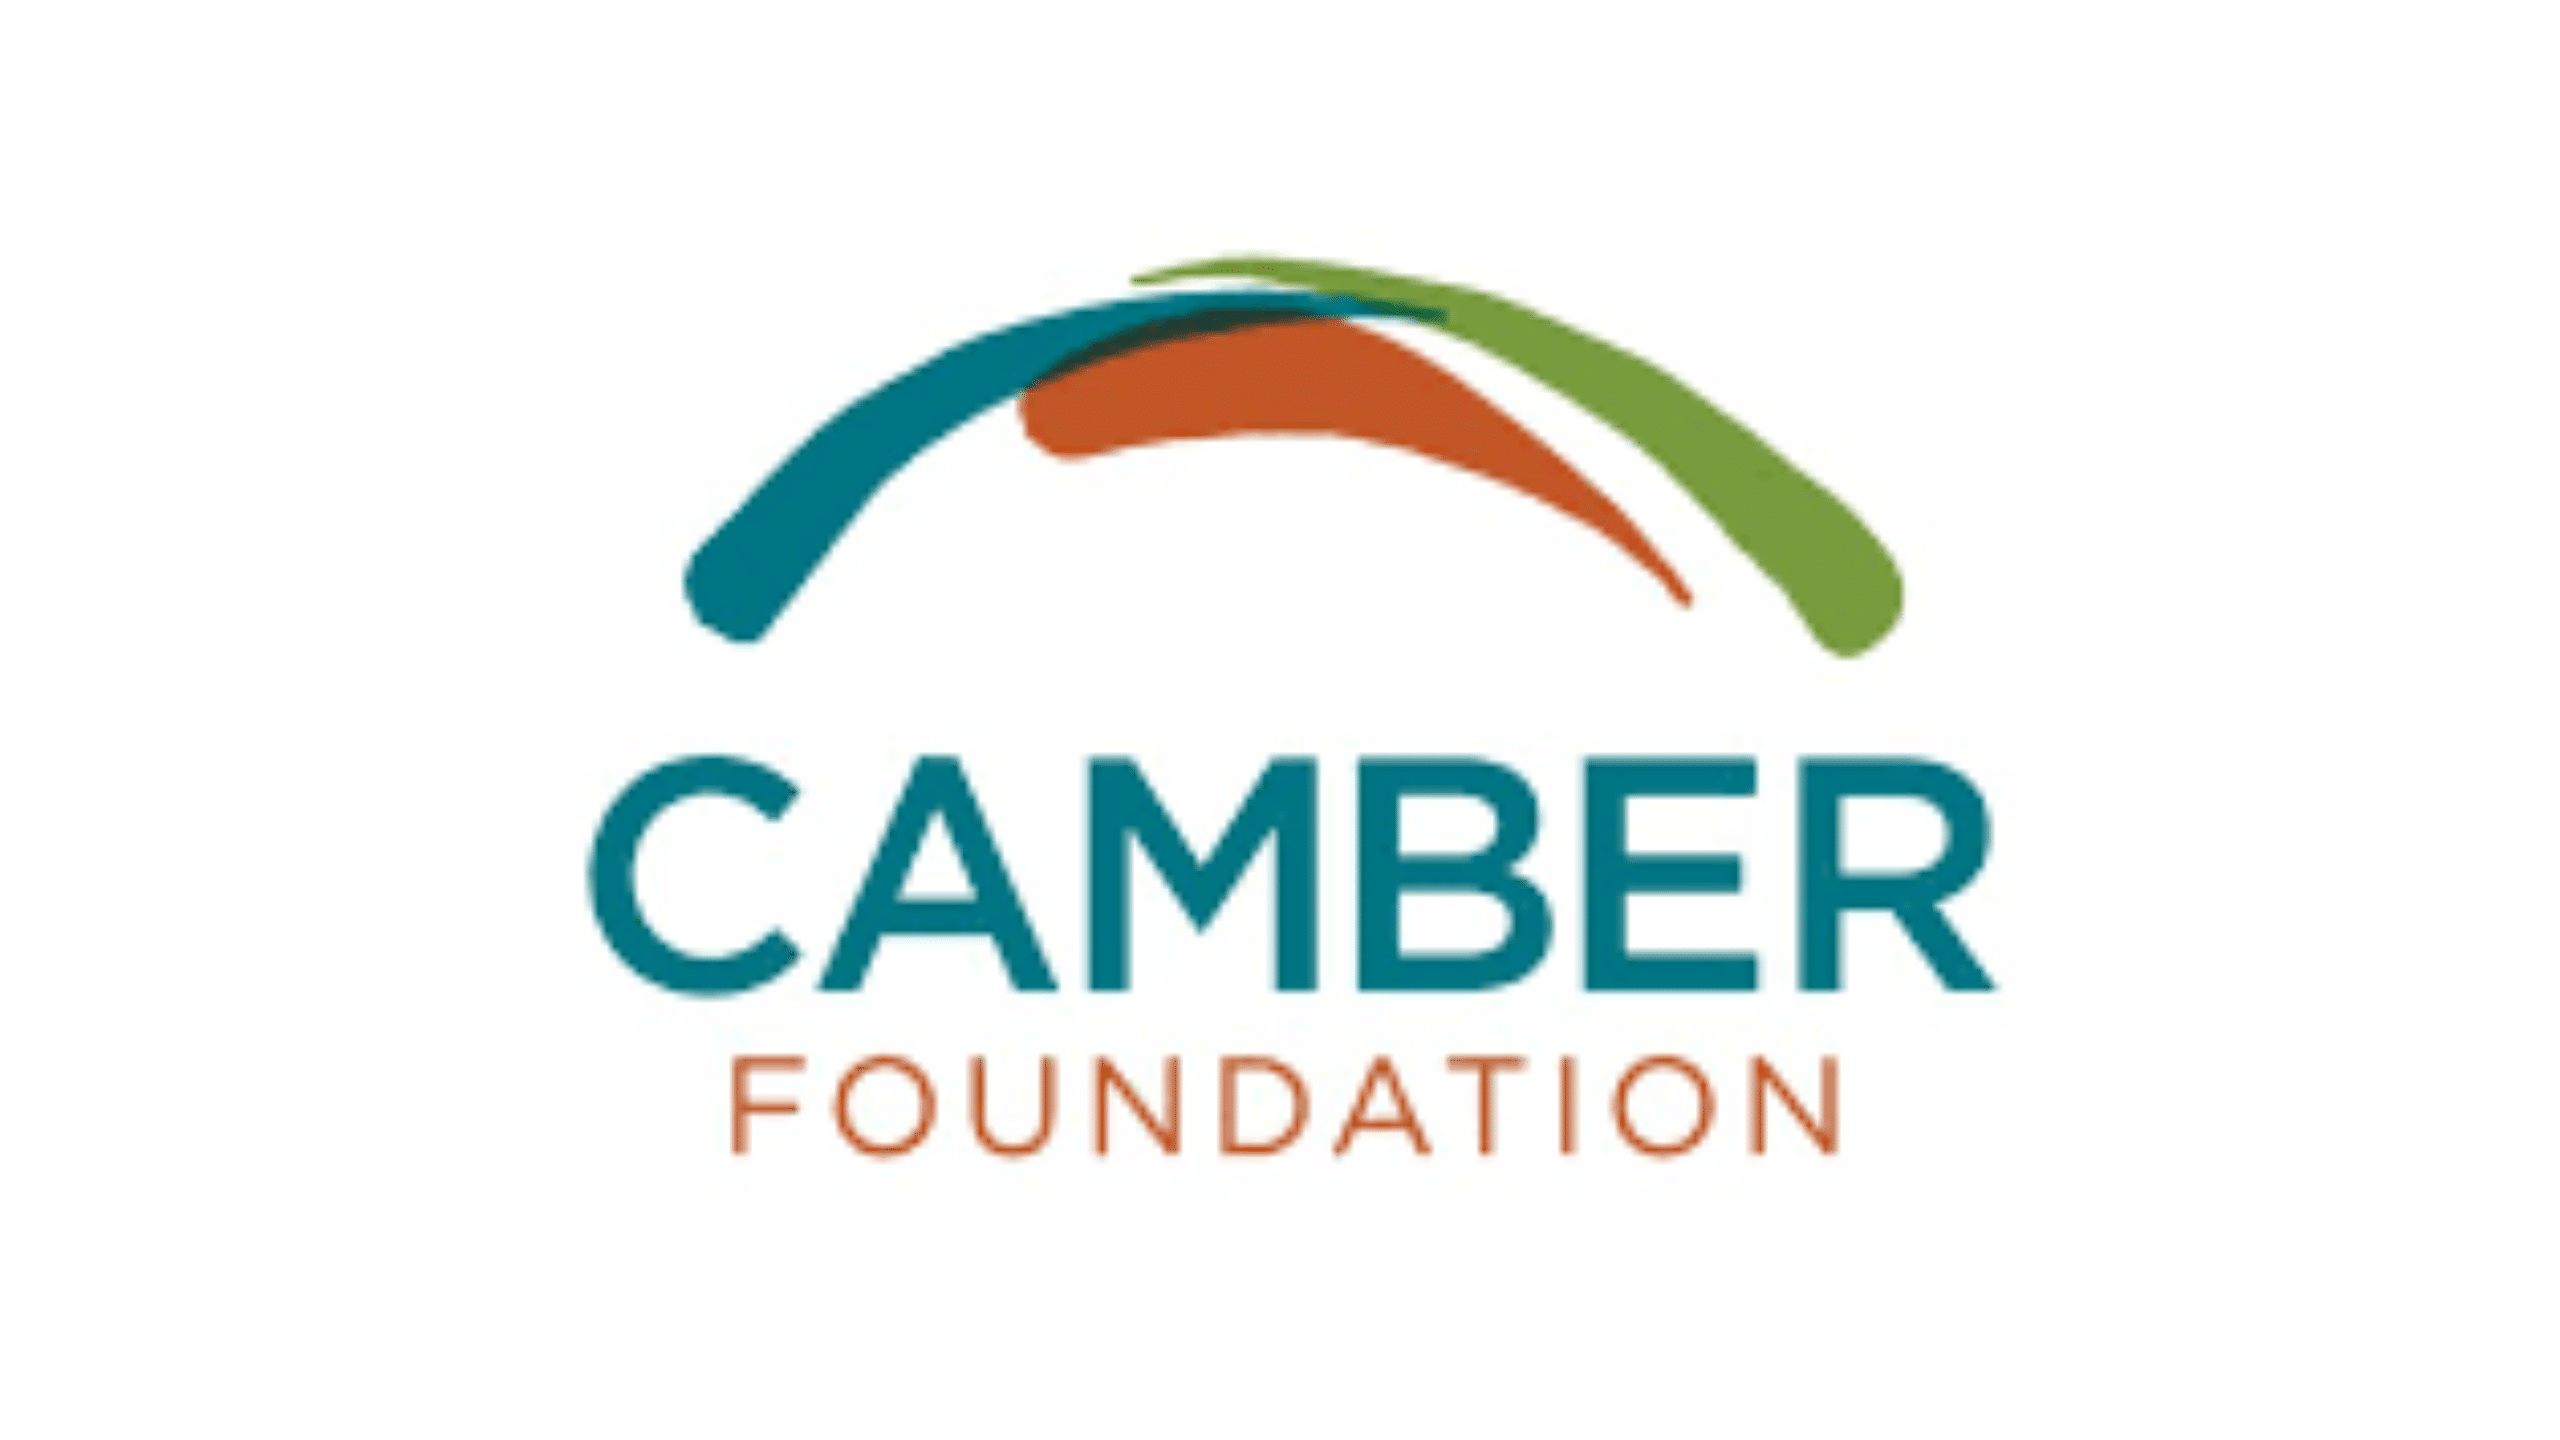 Camber Foundation announces $1 million in funding for Eastern North Carolina